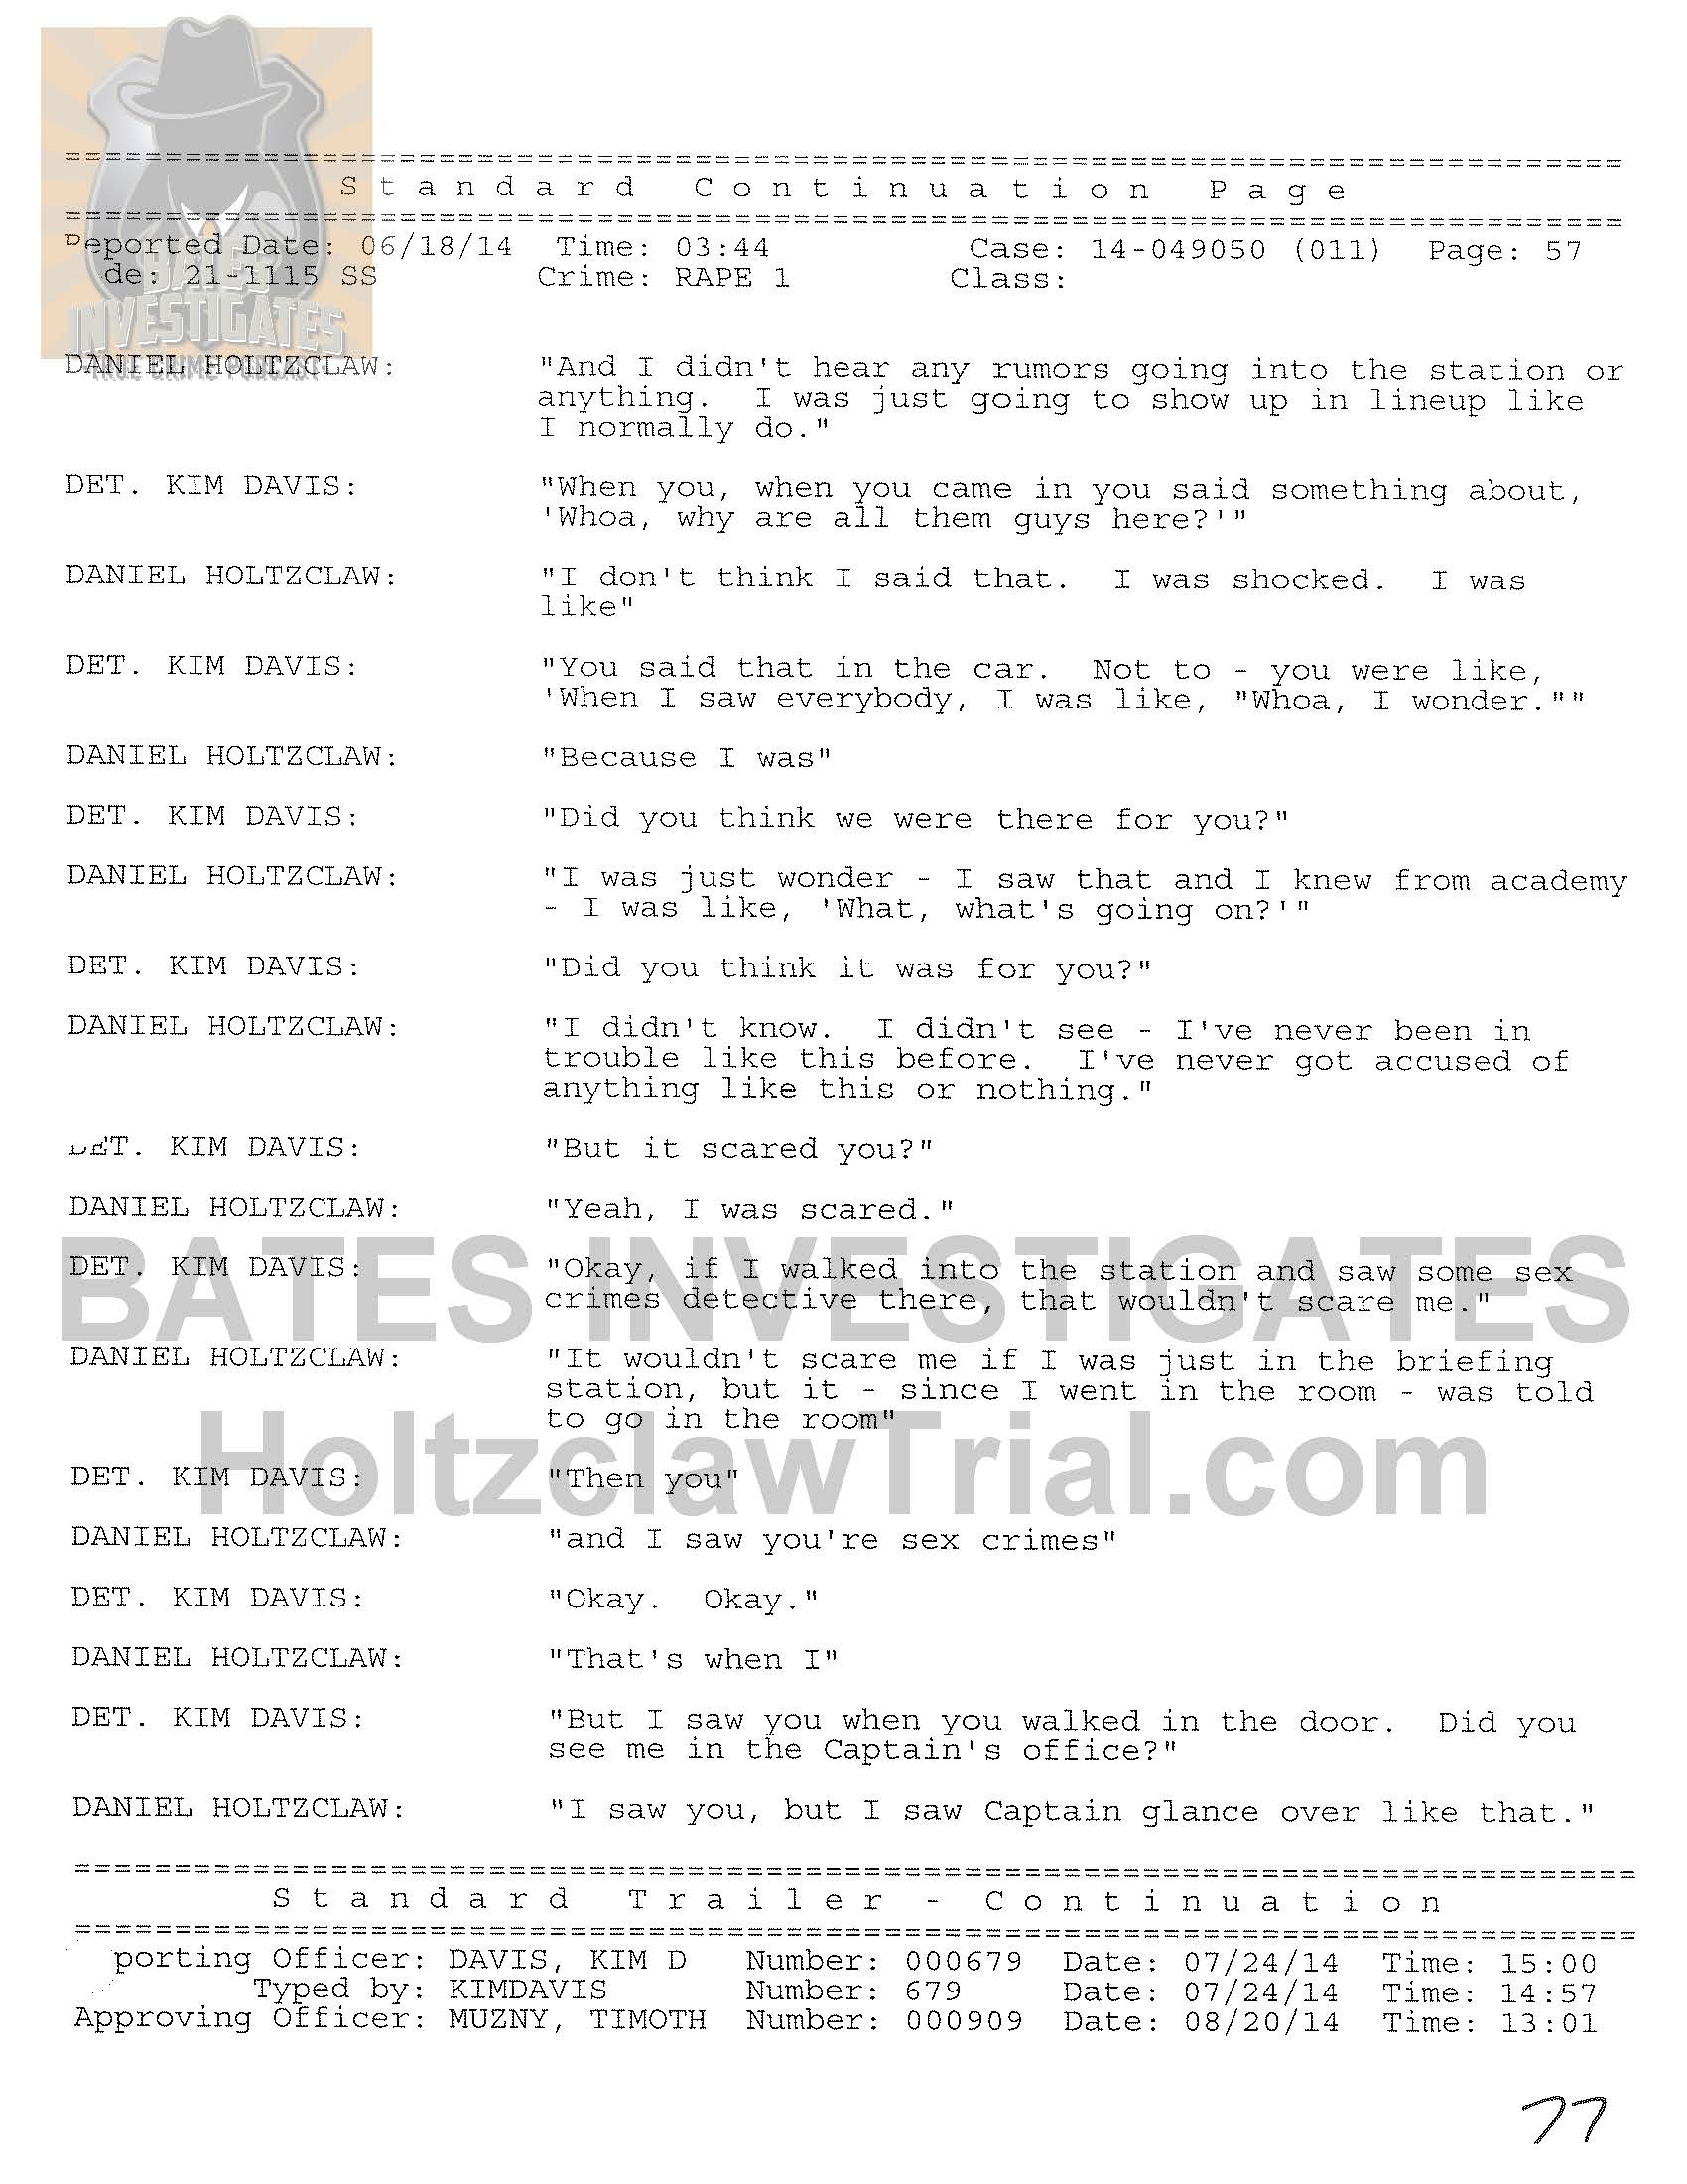 Holtzclaw Interrogation Transcript - Ep02 Redacted_Page_57.jpg